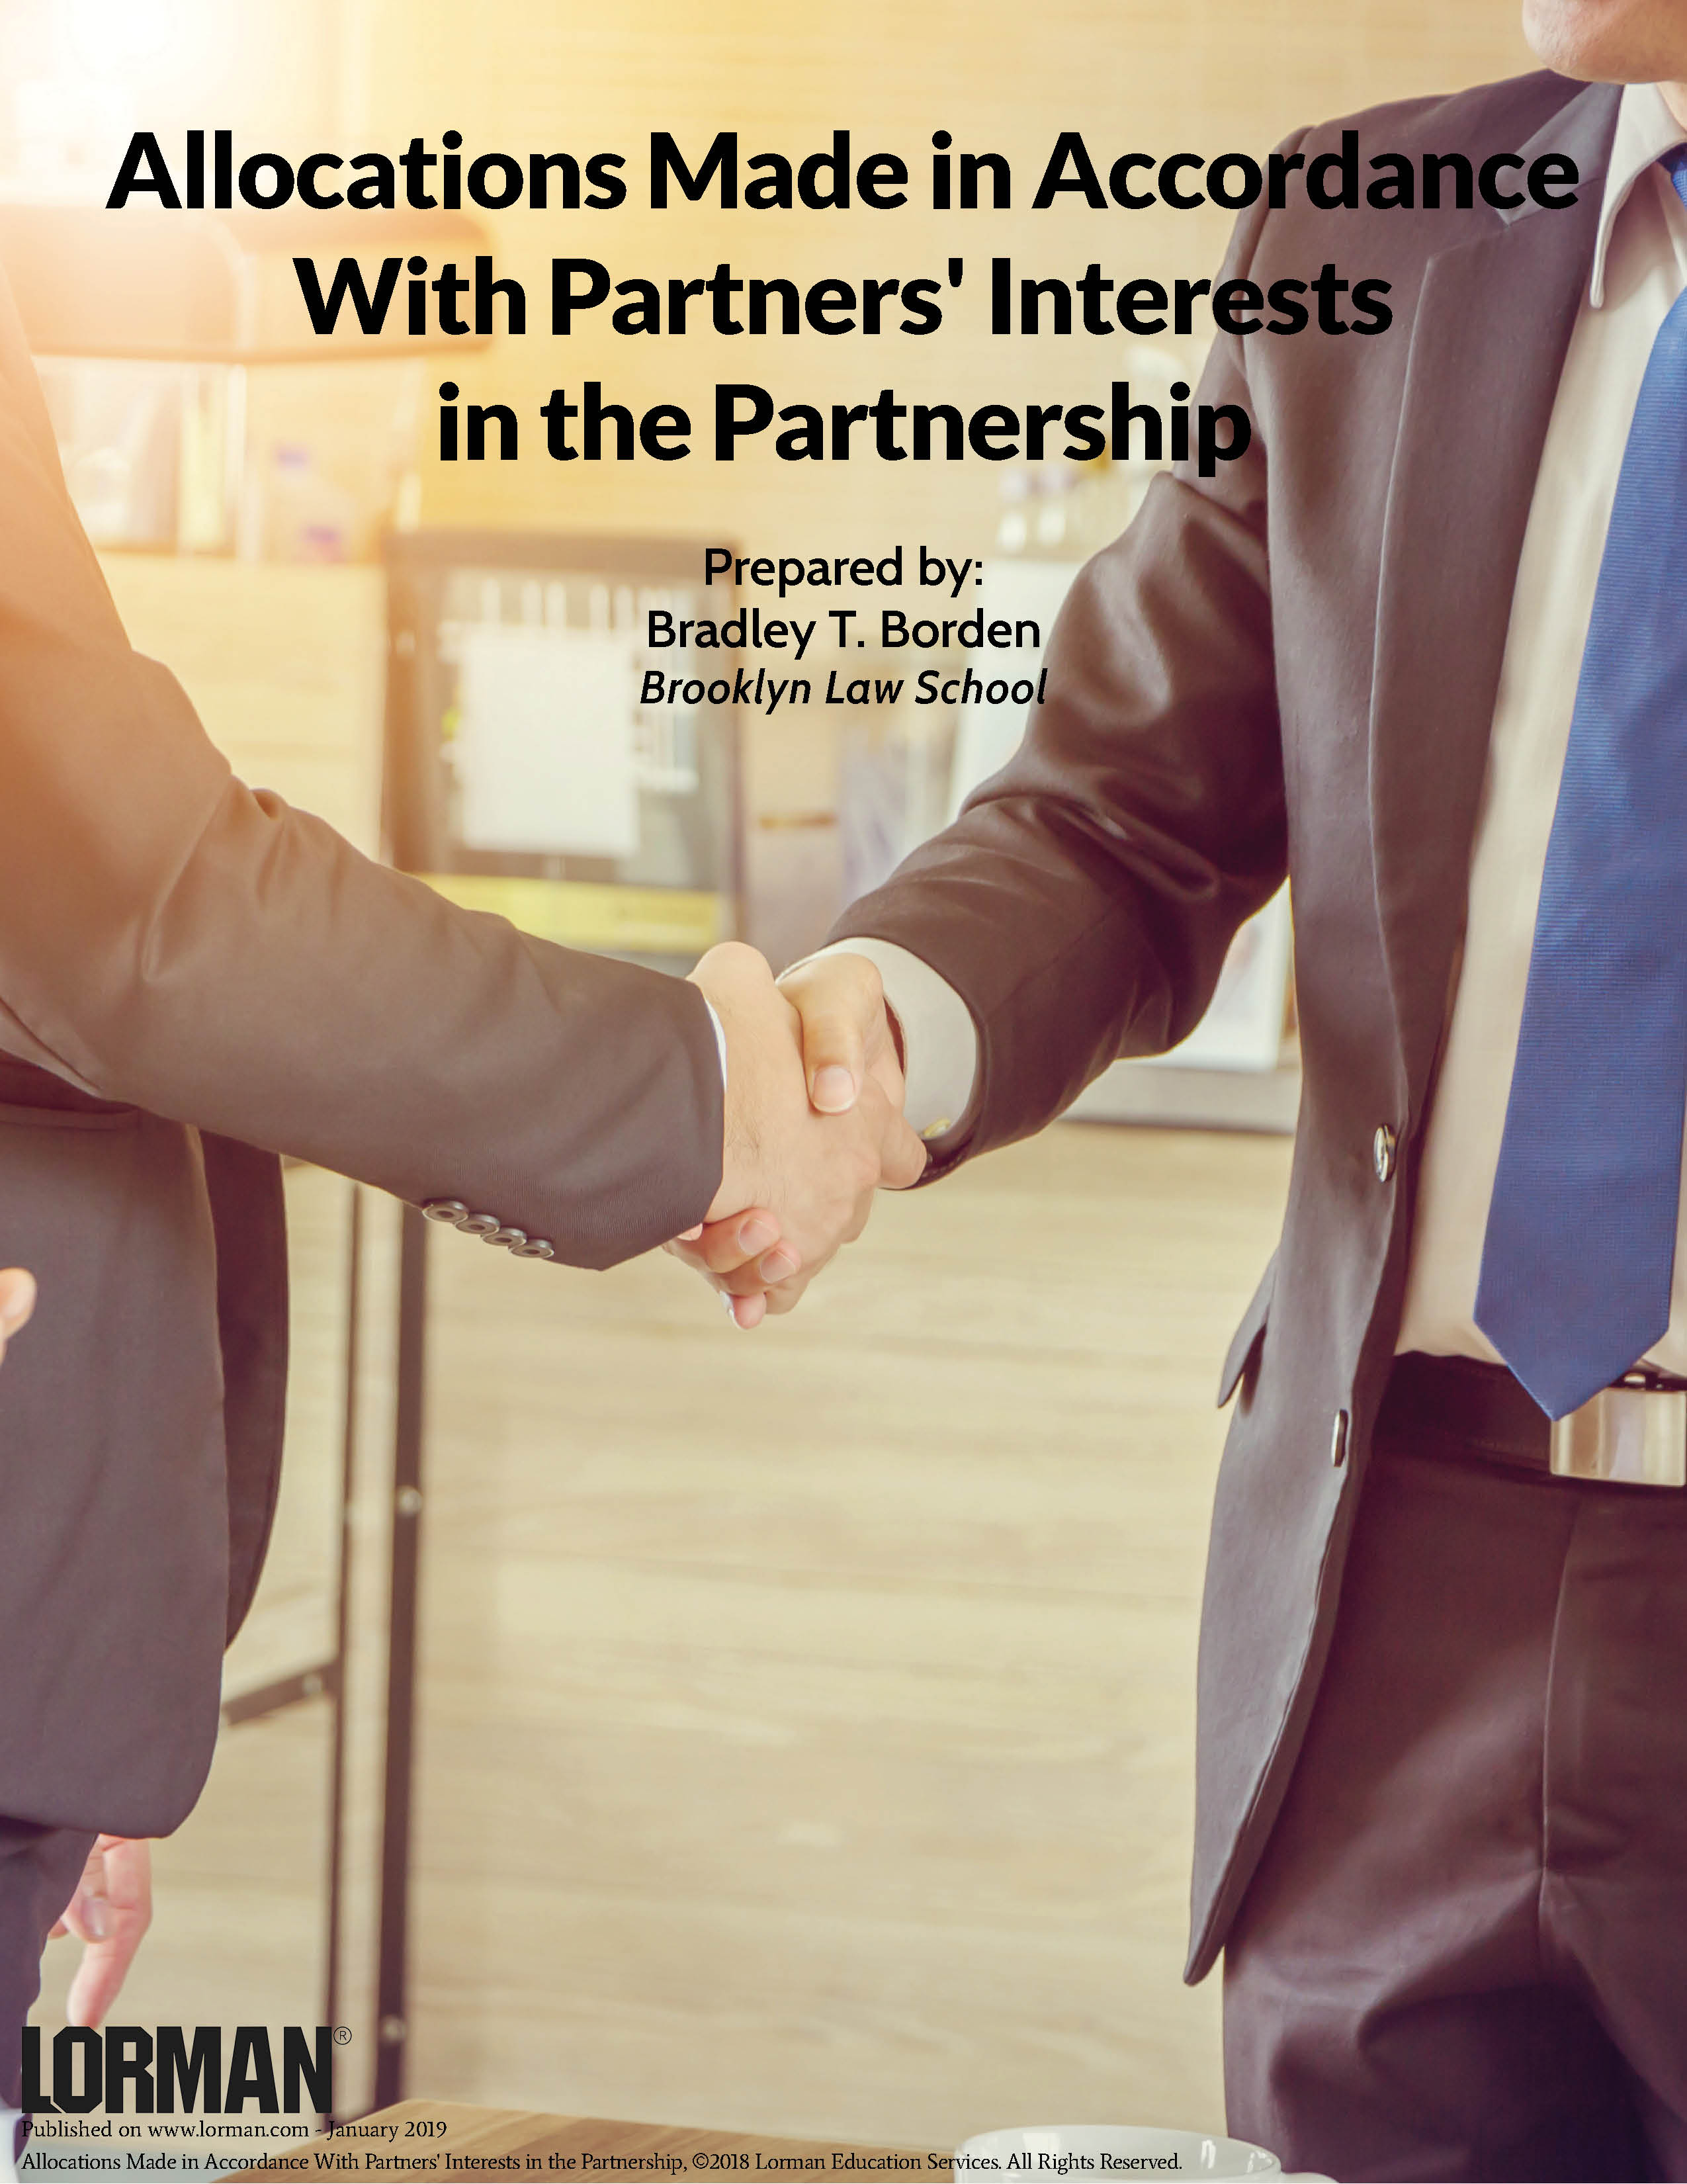 Allocations Made in Accordance With Partners' Interests in the Partnership